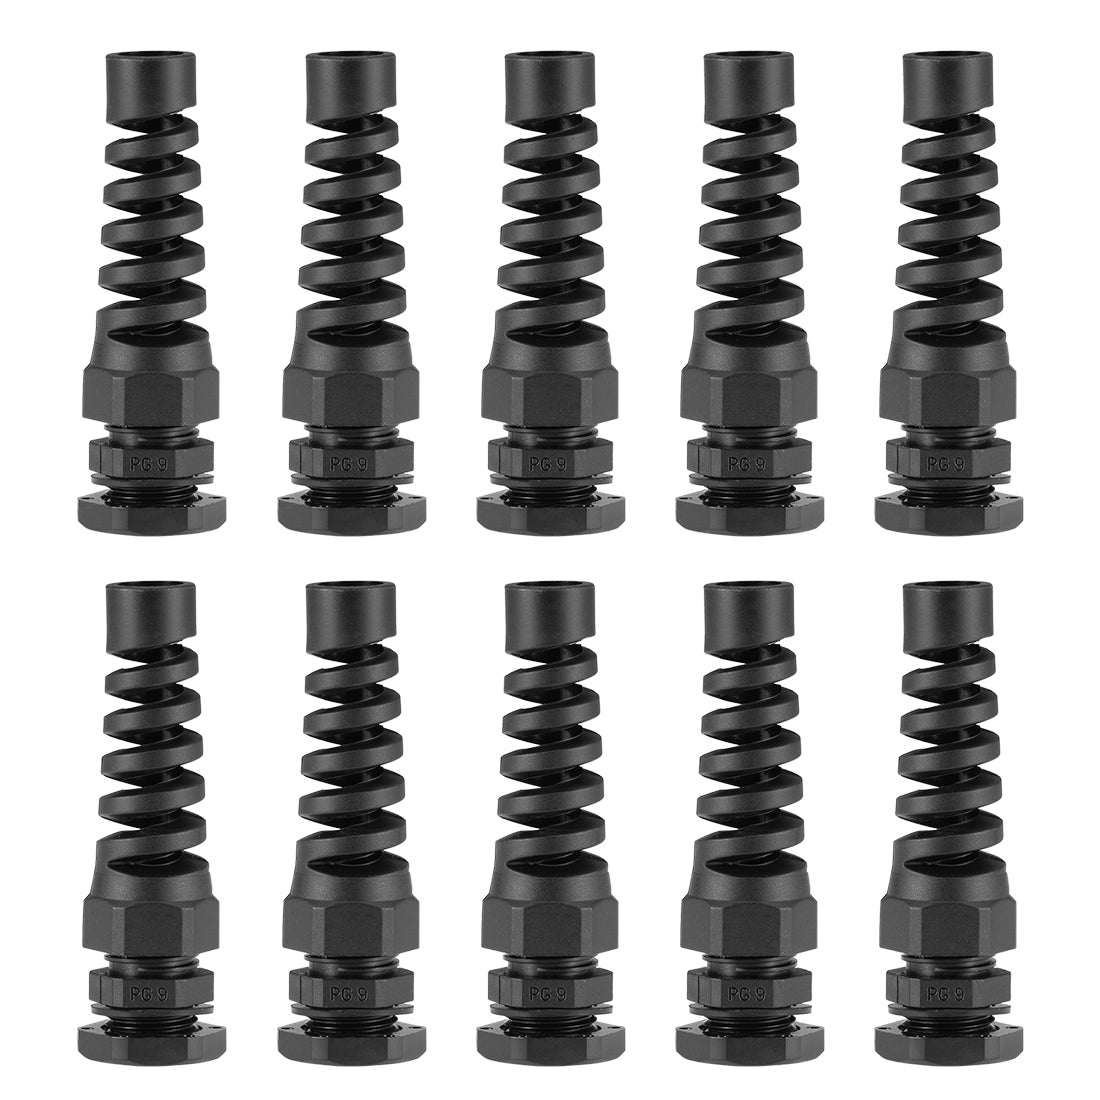 uxcell Uxcell PG9 Cable Gland 4mm-8mm Wire Hole Waterproof Nylon Joint Adjustable Locknut with Strain Relief Black 10pcs